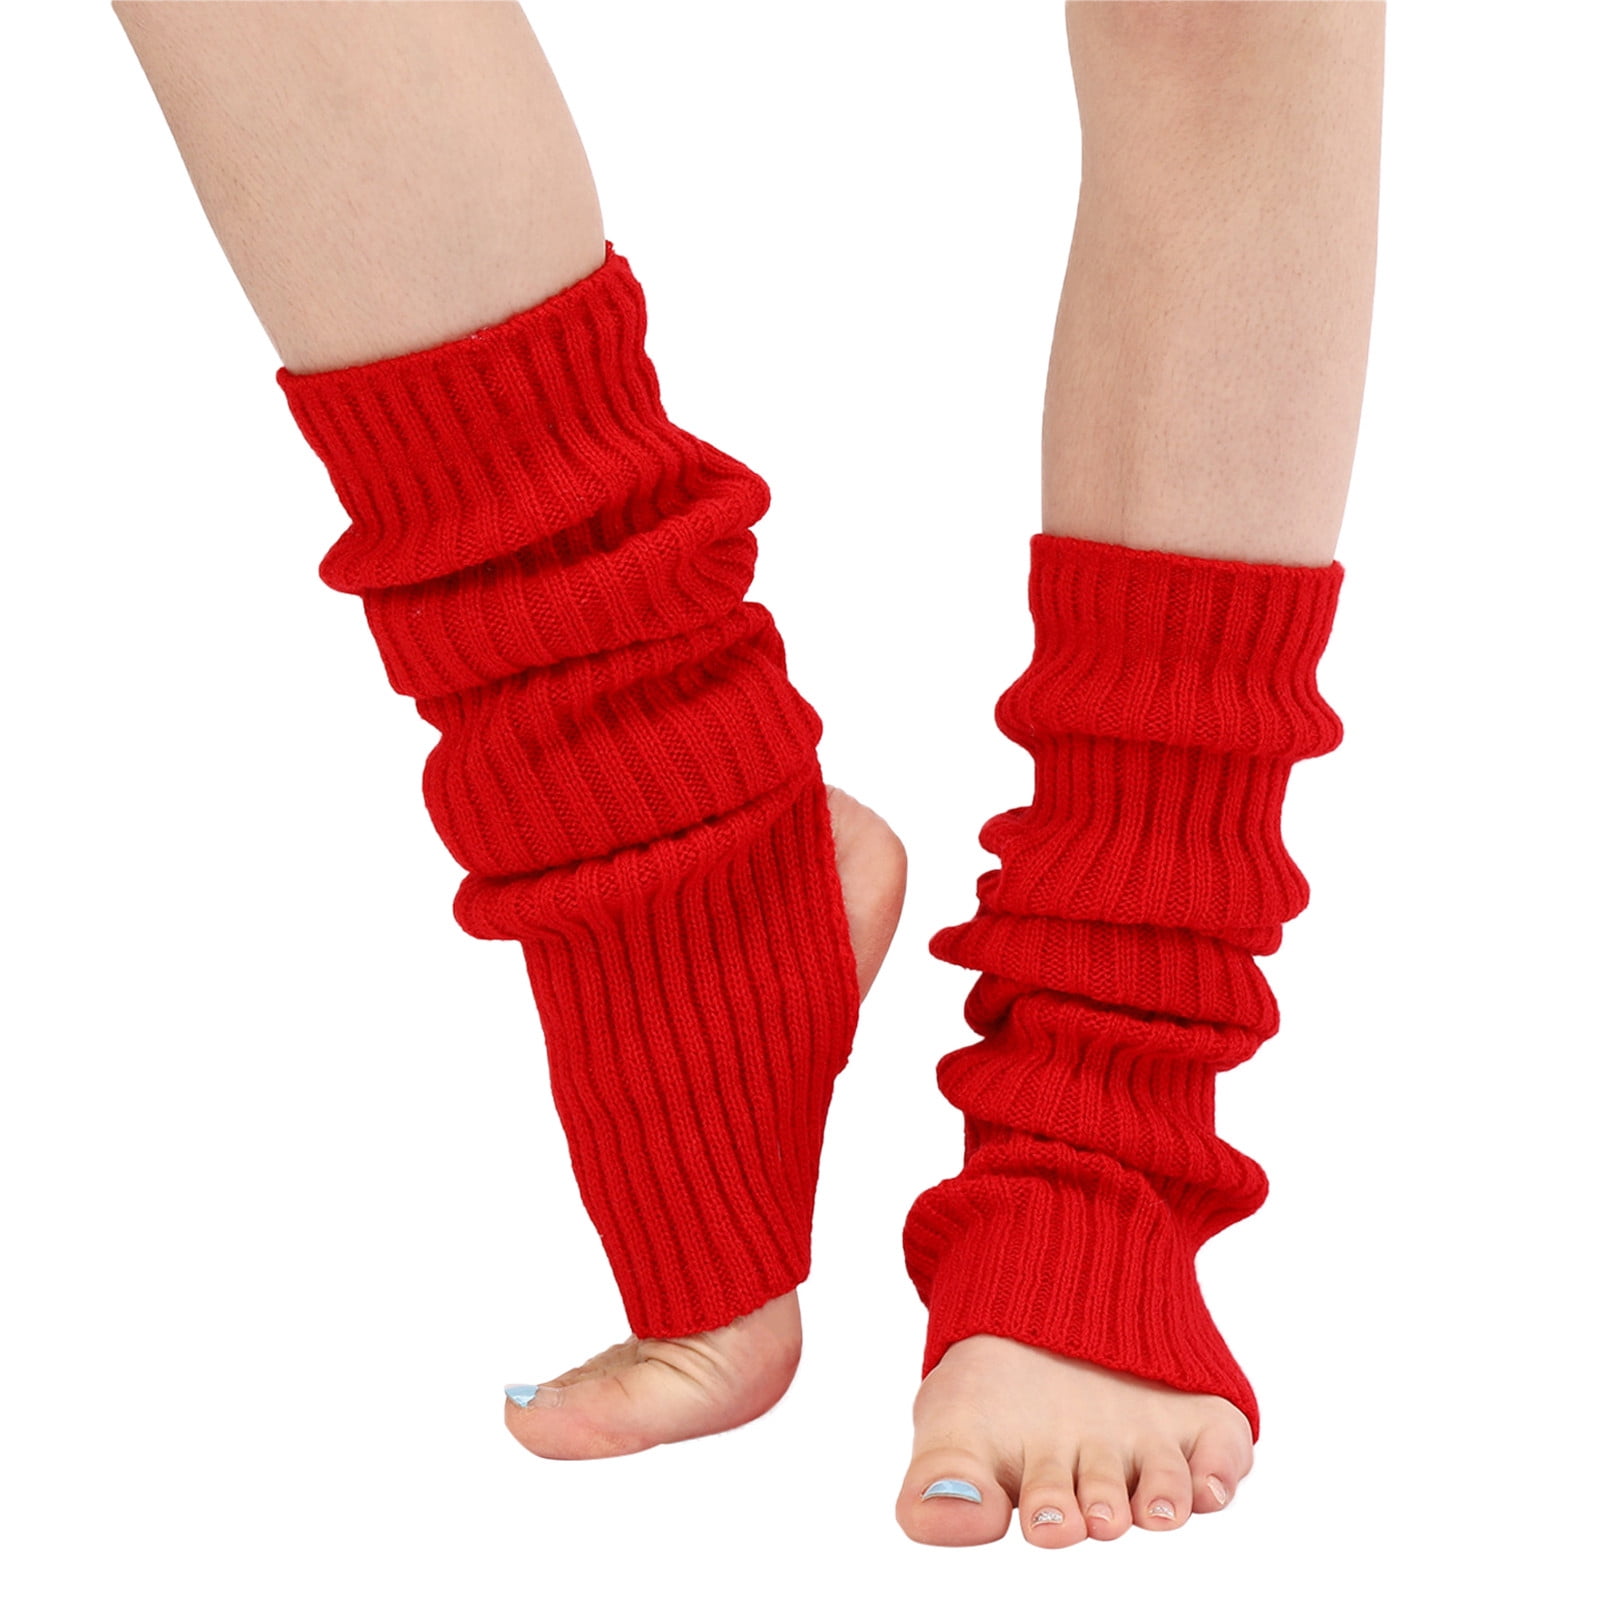  Luxe Legs Lace Leg Warmers-Over the Knee Legwarmers